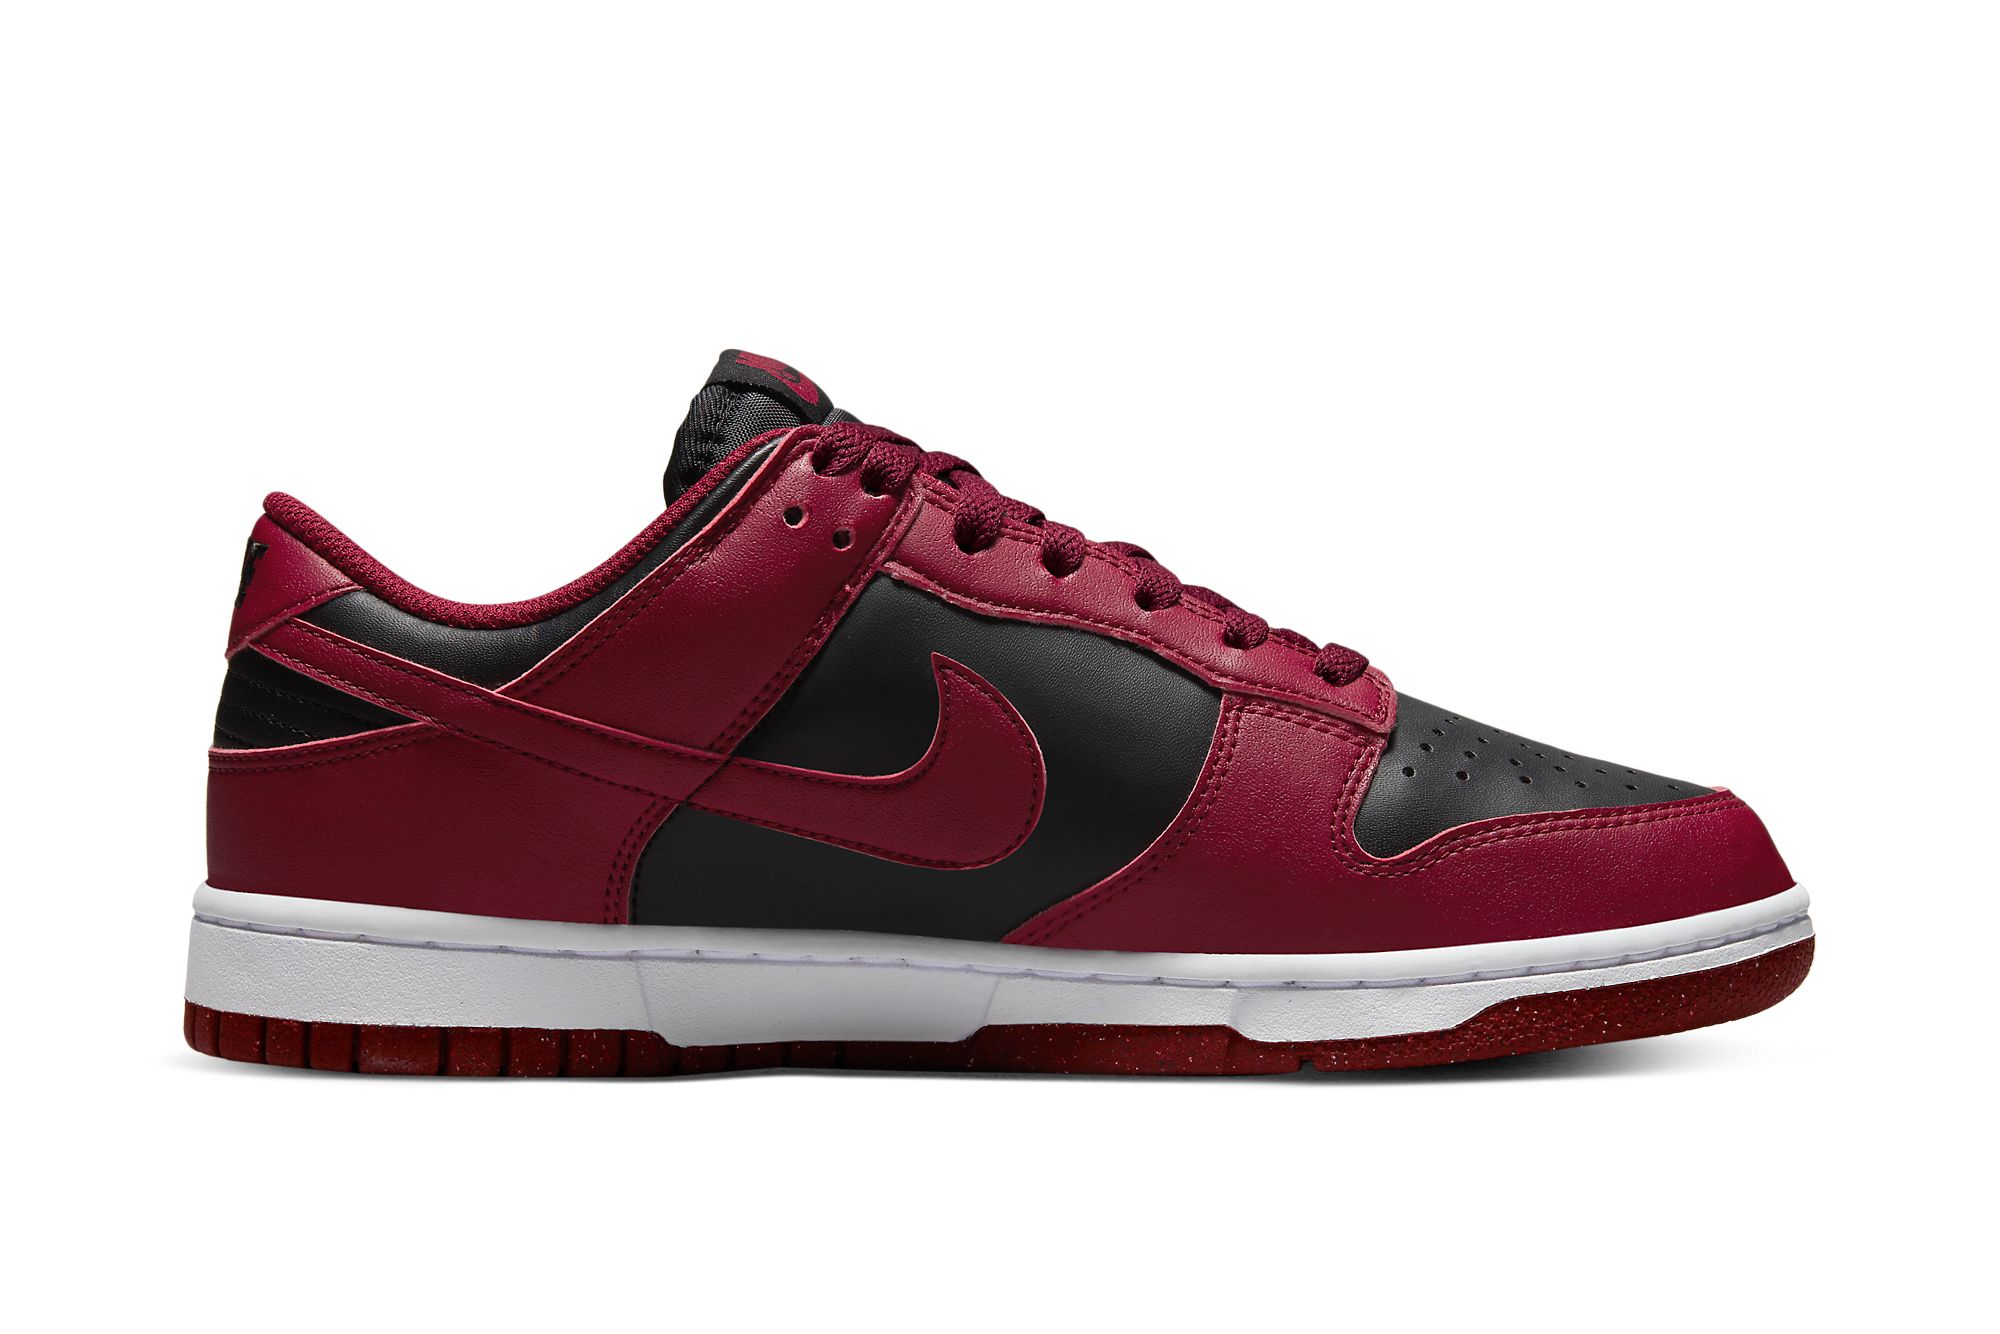 Nike's nike sb red black Sustainable Dunk Low Next Nature Appears in Red and Black